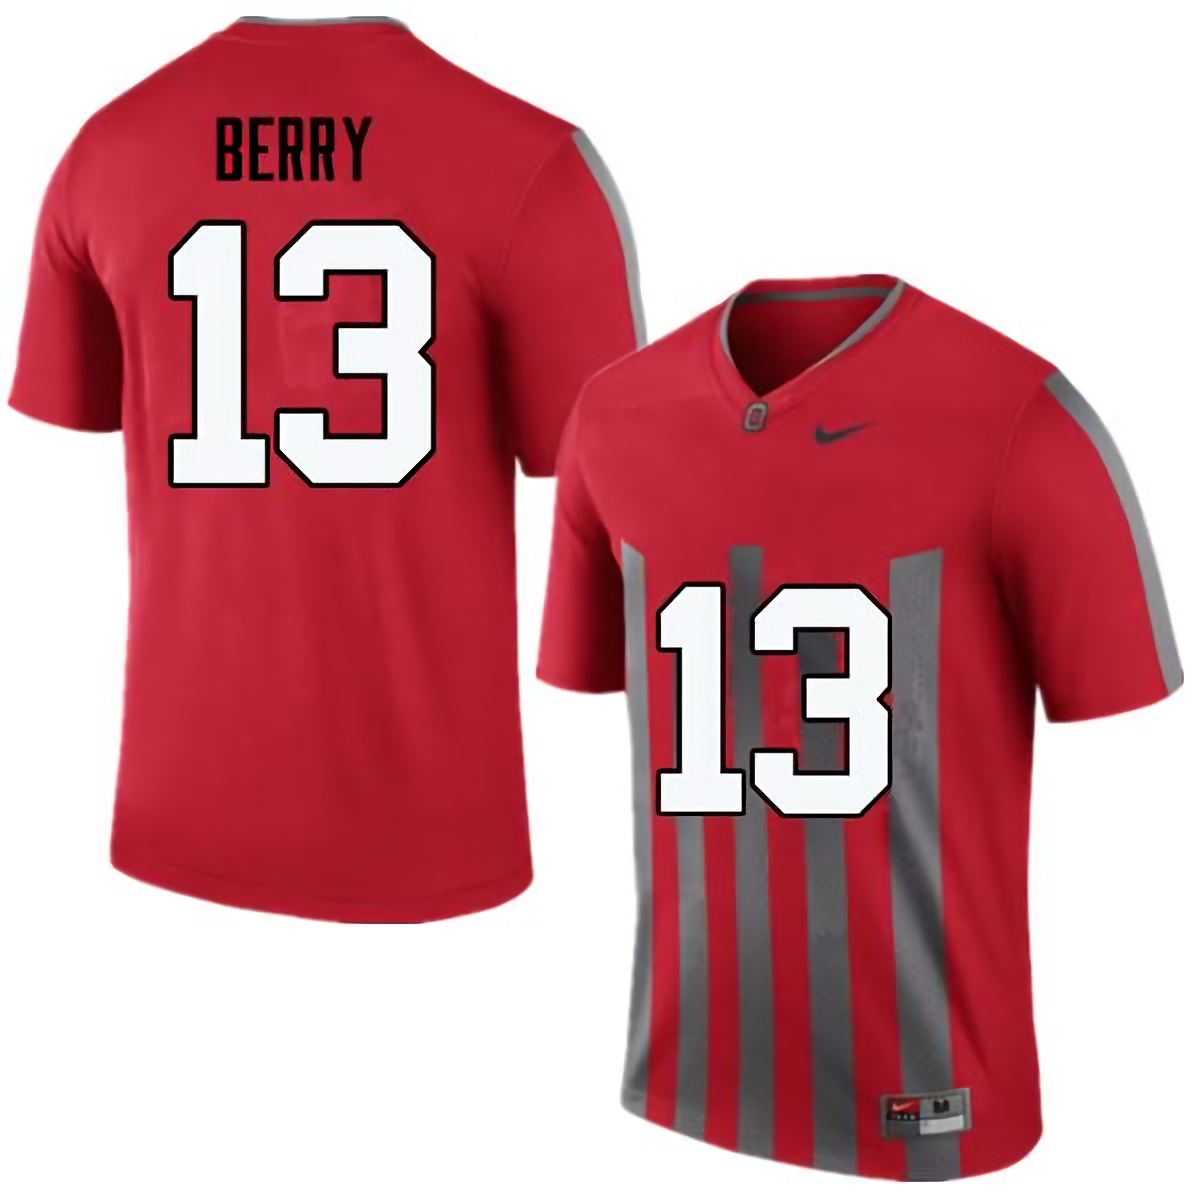 Rashod Berry Ohio State Buckeyes Men's NCAA #13 Nike Throwback Red College Stitched Football Jersey RKU0056NS